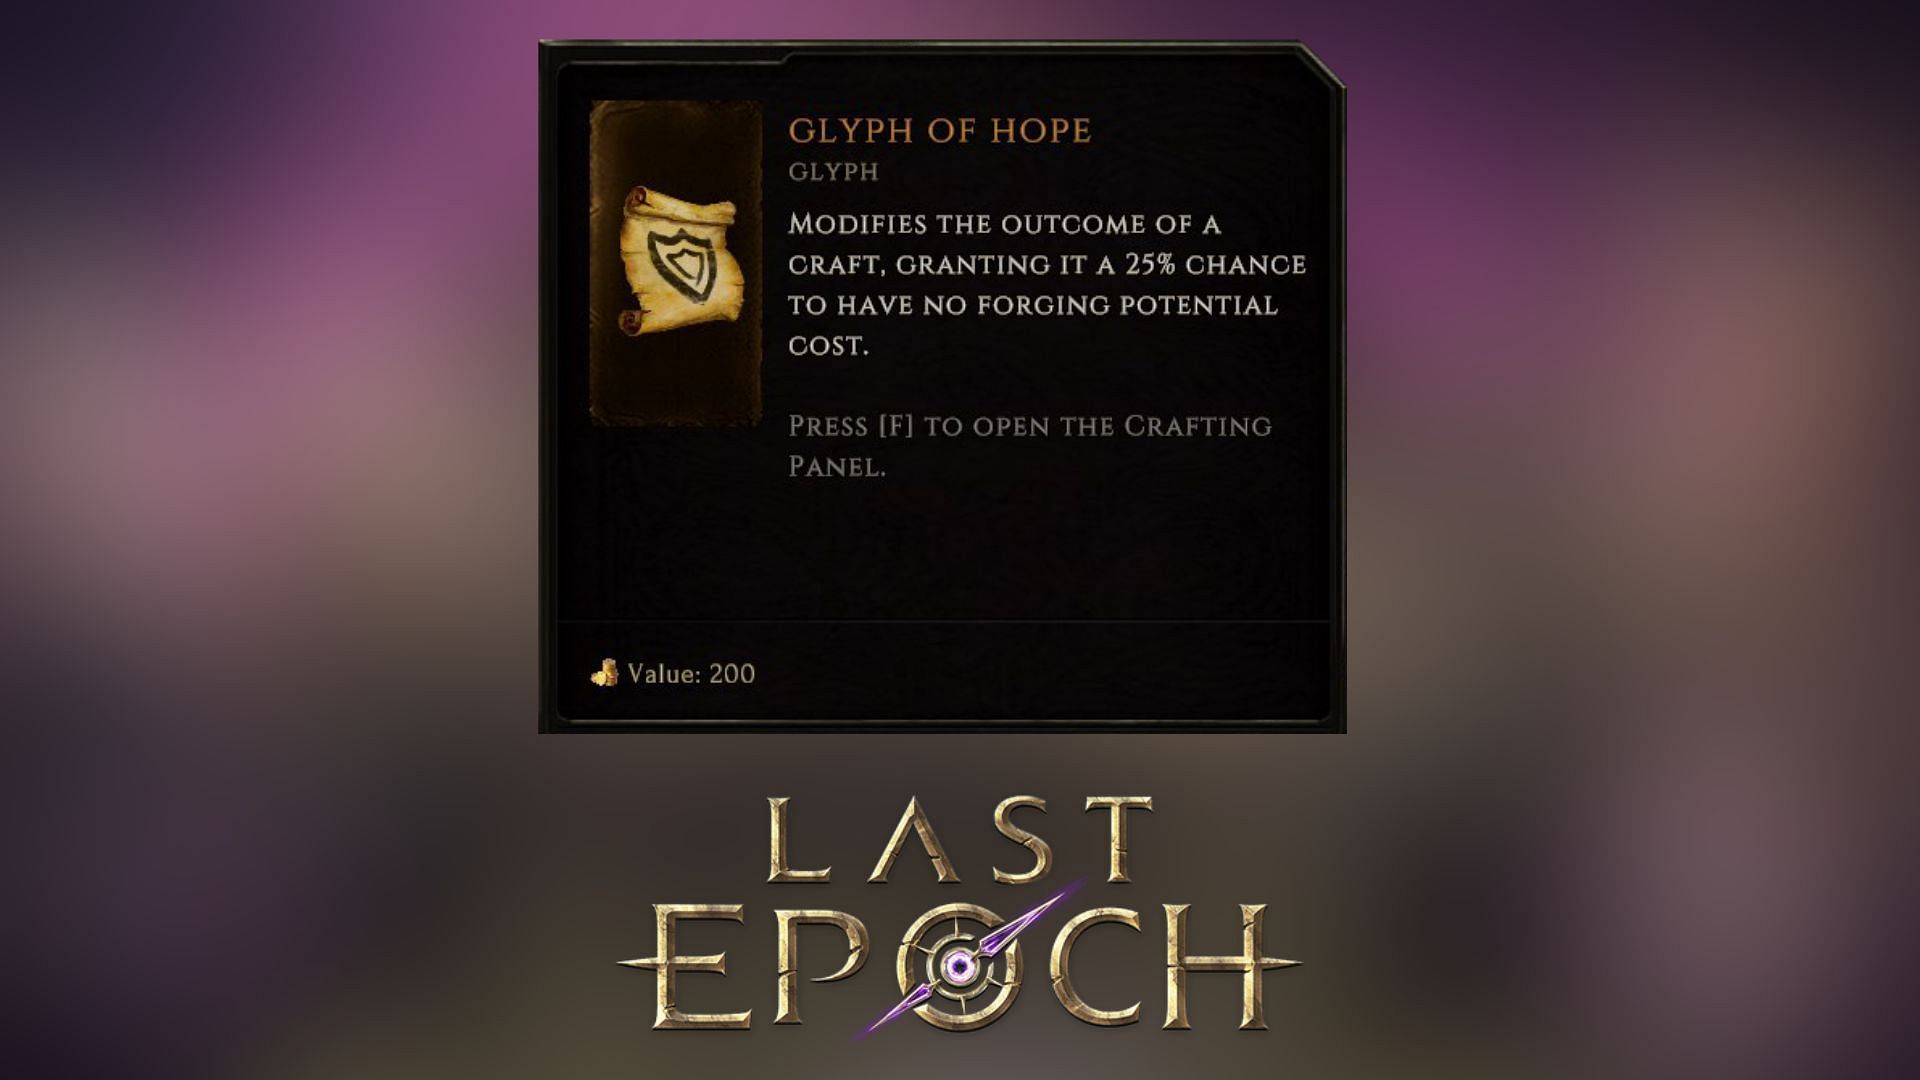 Glyph of Hope grants the outcome of crafting a 25% chance of no Forging Potential cost (Image via Eleventh Hour Games)